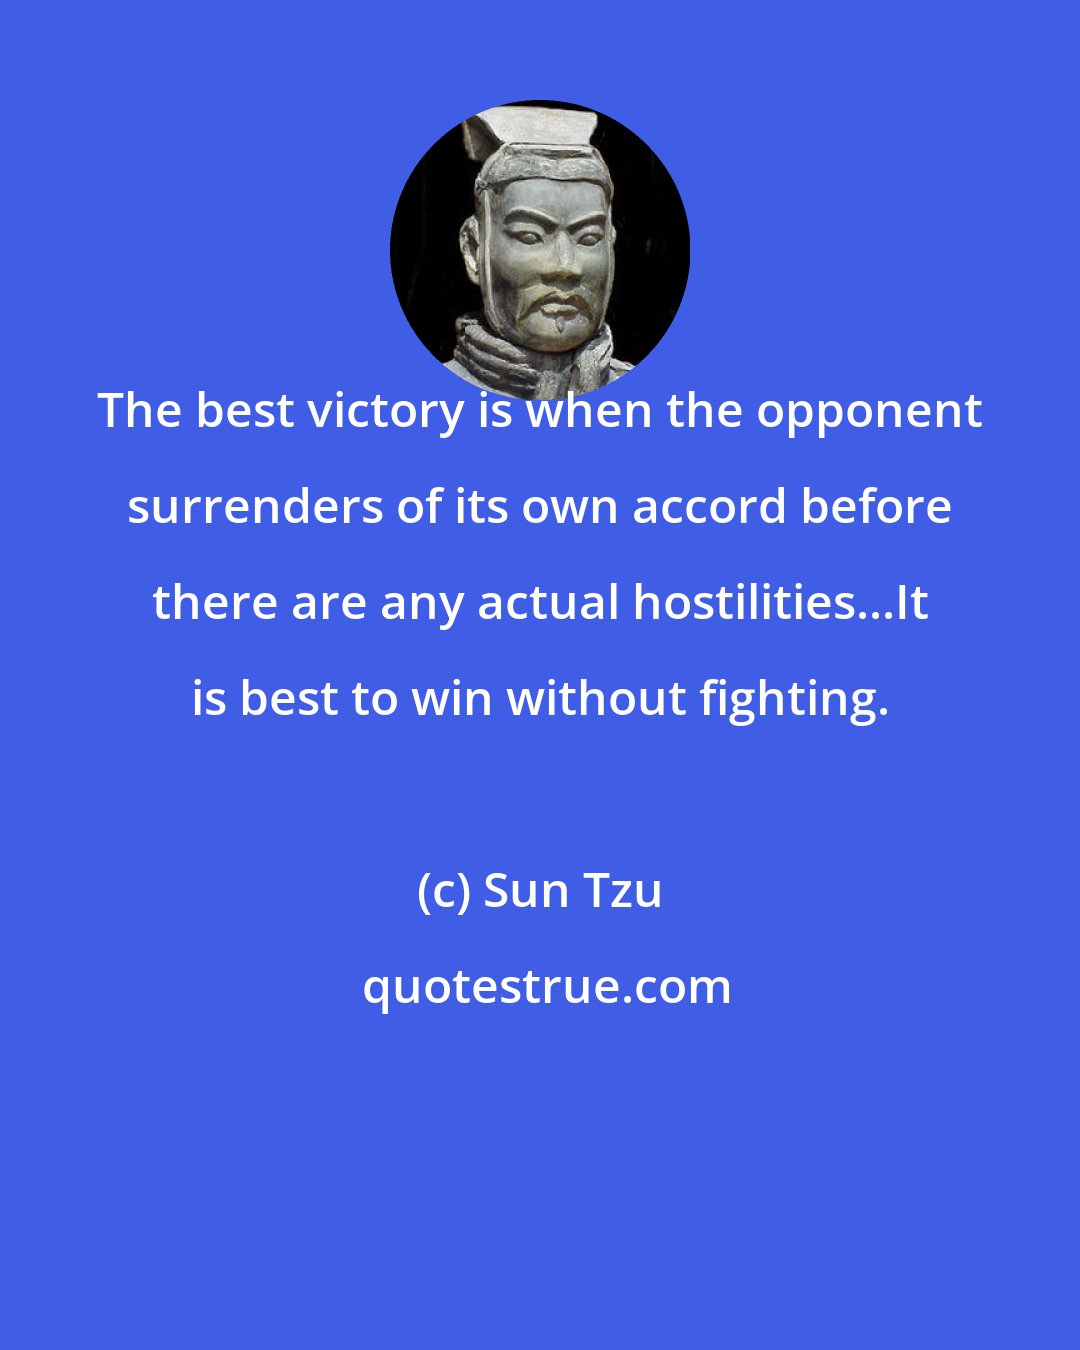 Sun Tzu: The best victory is when the opponent surrenders of its own accord before there are any actual hostilities...It is best to win without fighting.